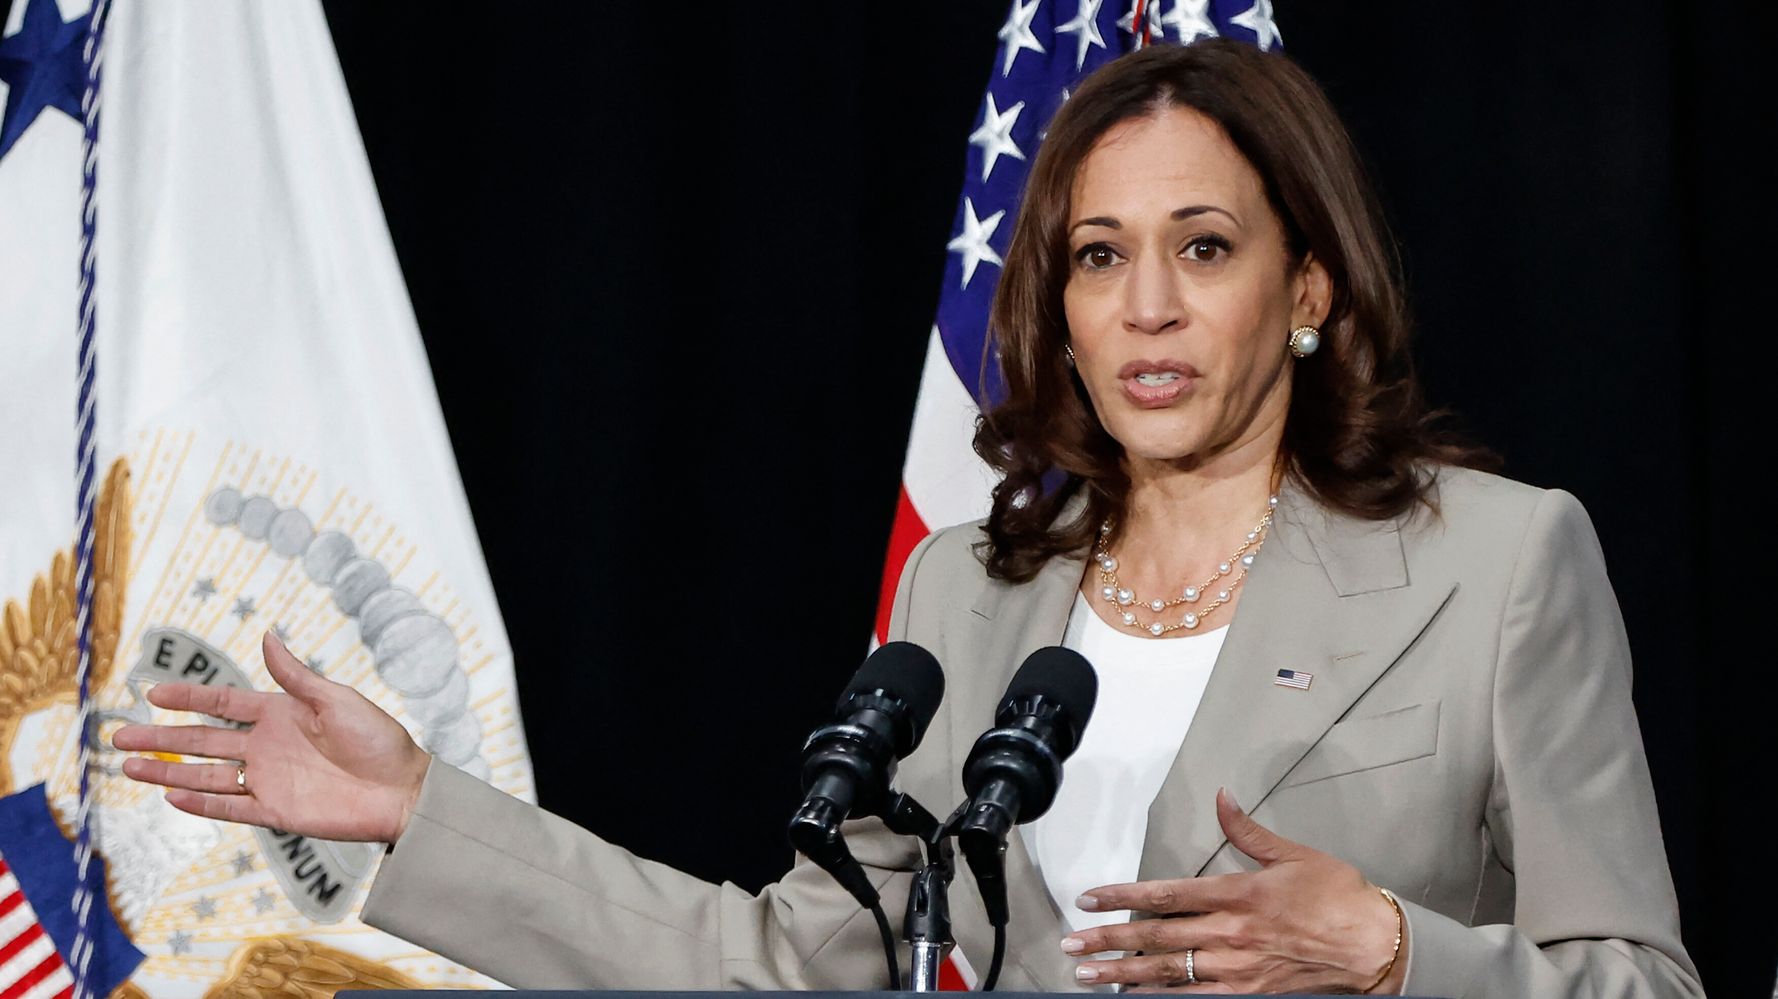 Kamala Harris Says Birth Control, Same-Sex Marriage At Risk With Roe Decision